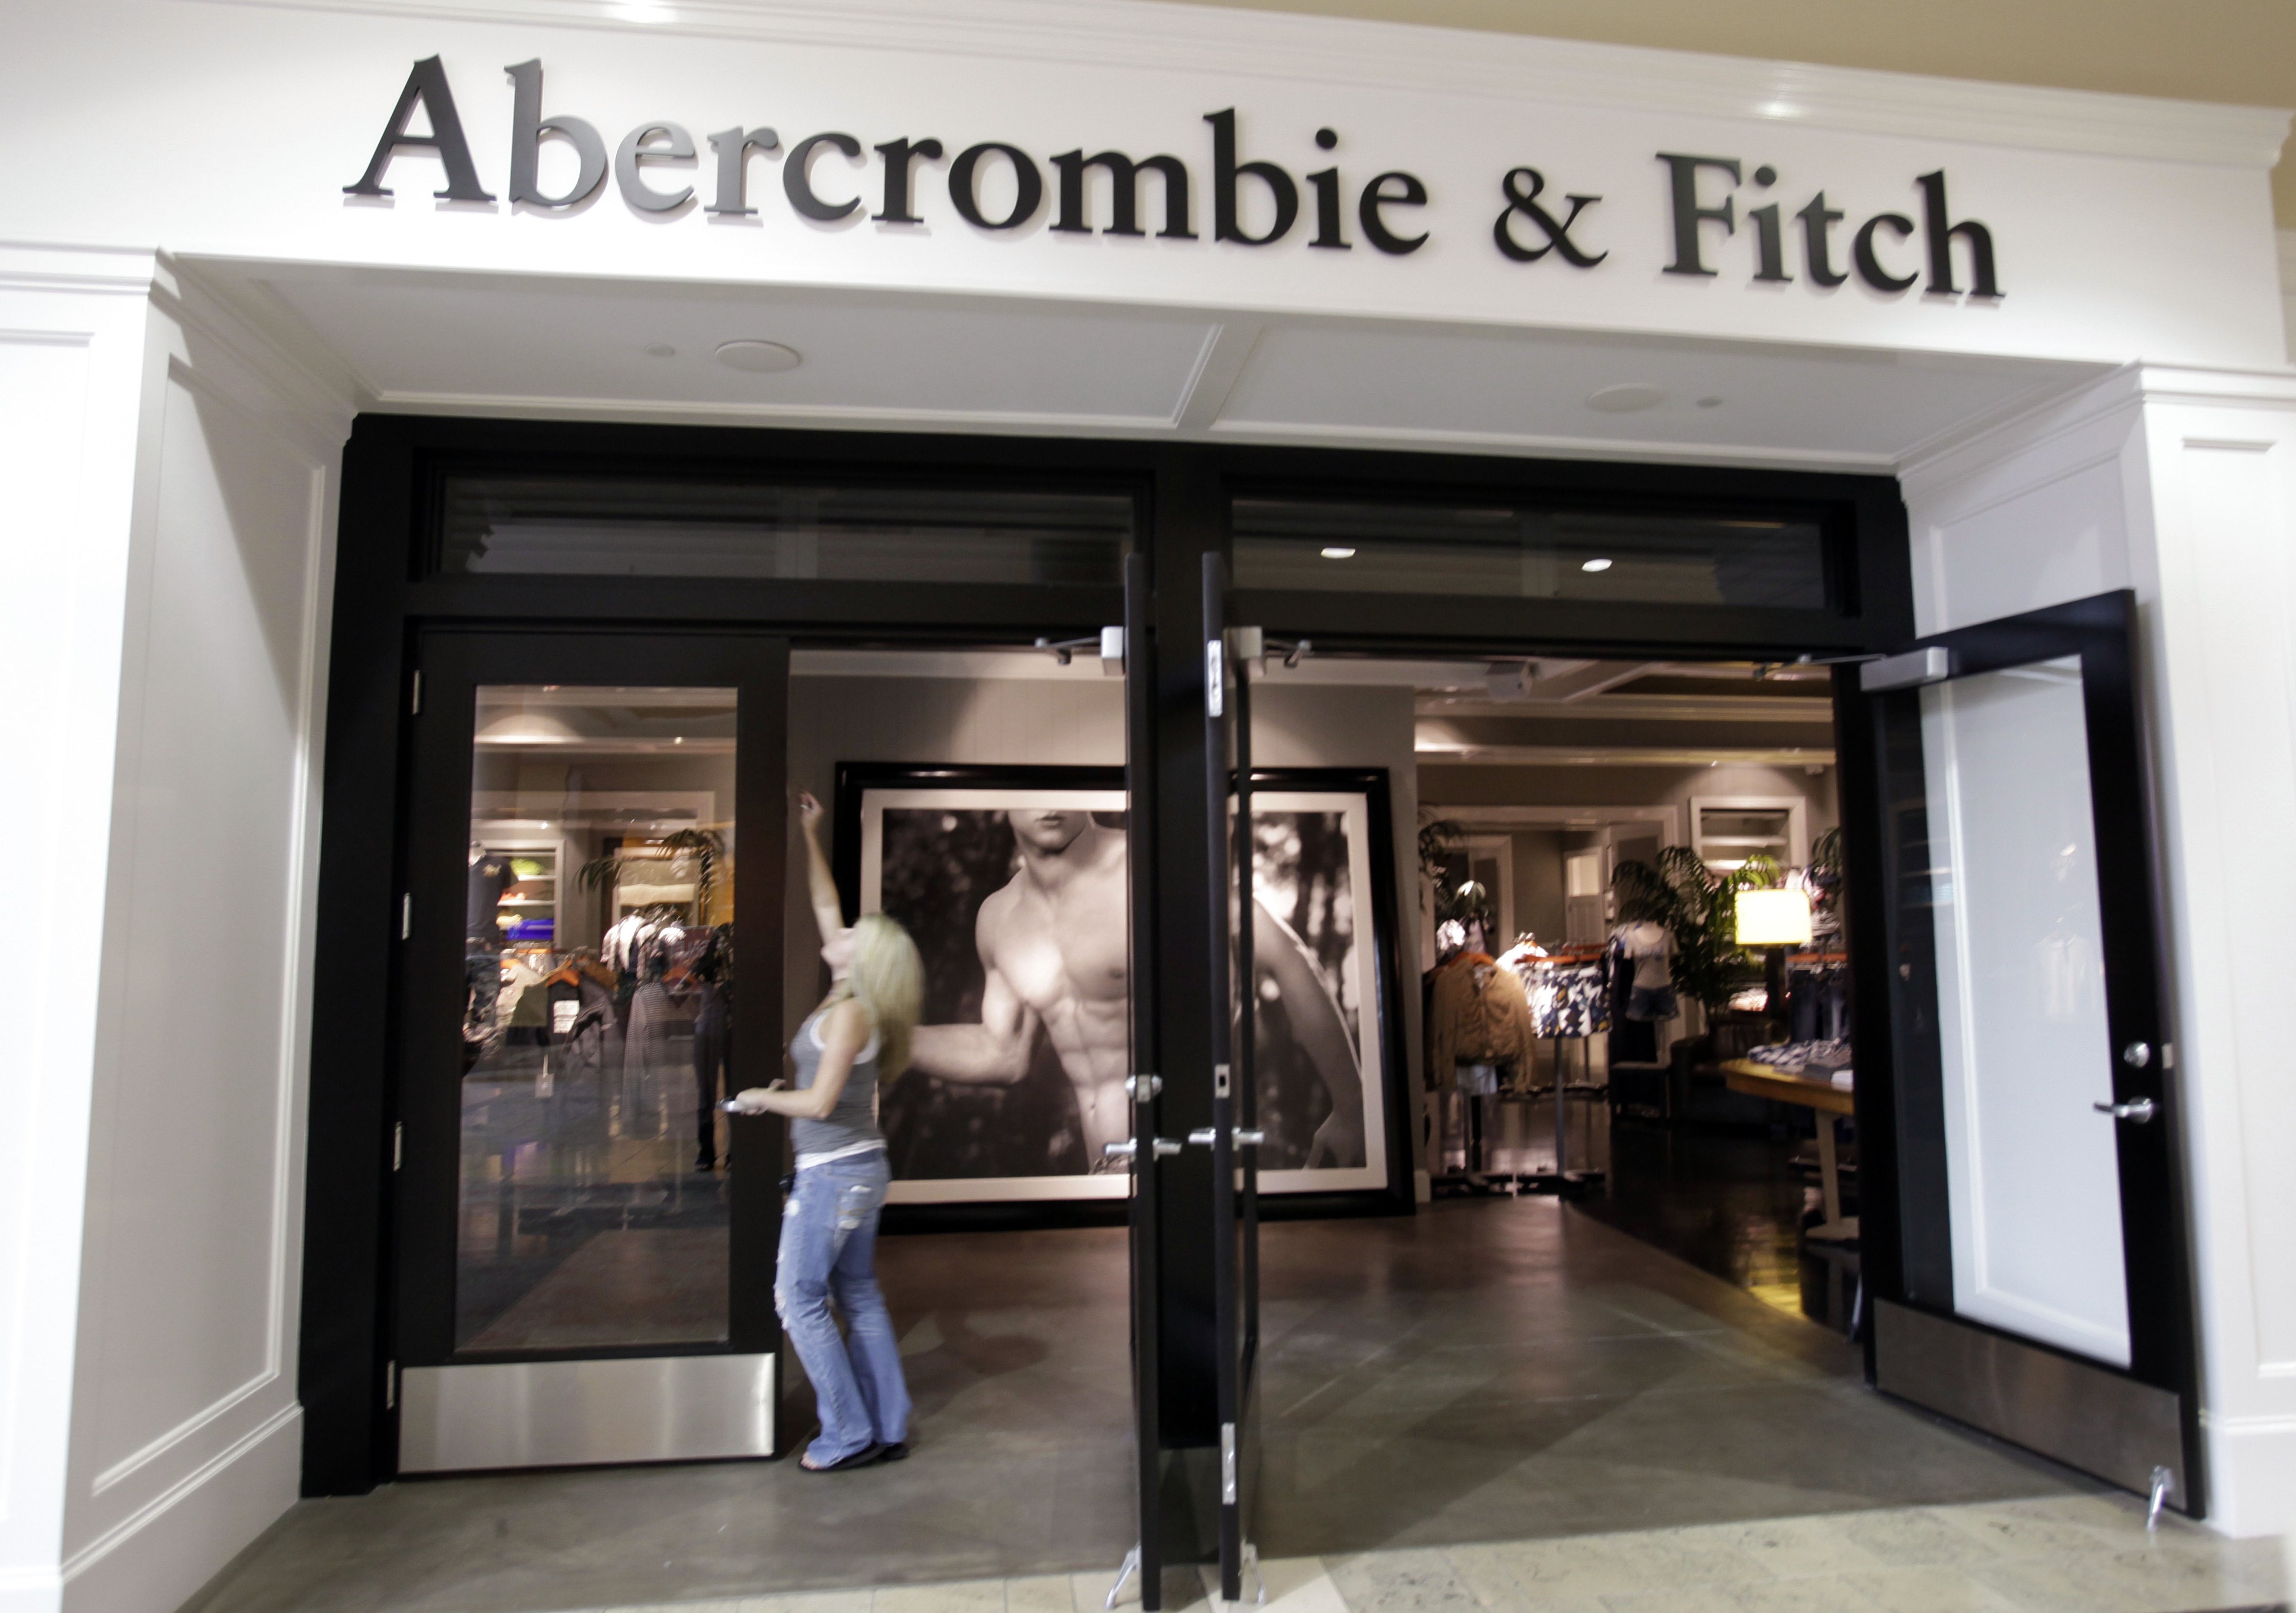 Cynthia Chiang's Blog » Archive » Abercrombie & Fitch Finally Changes